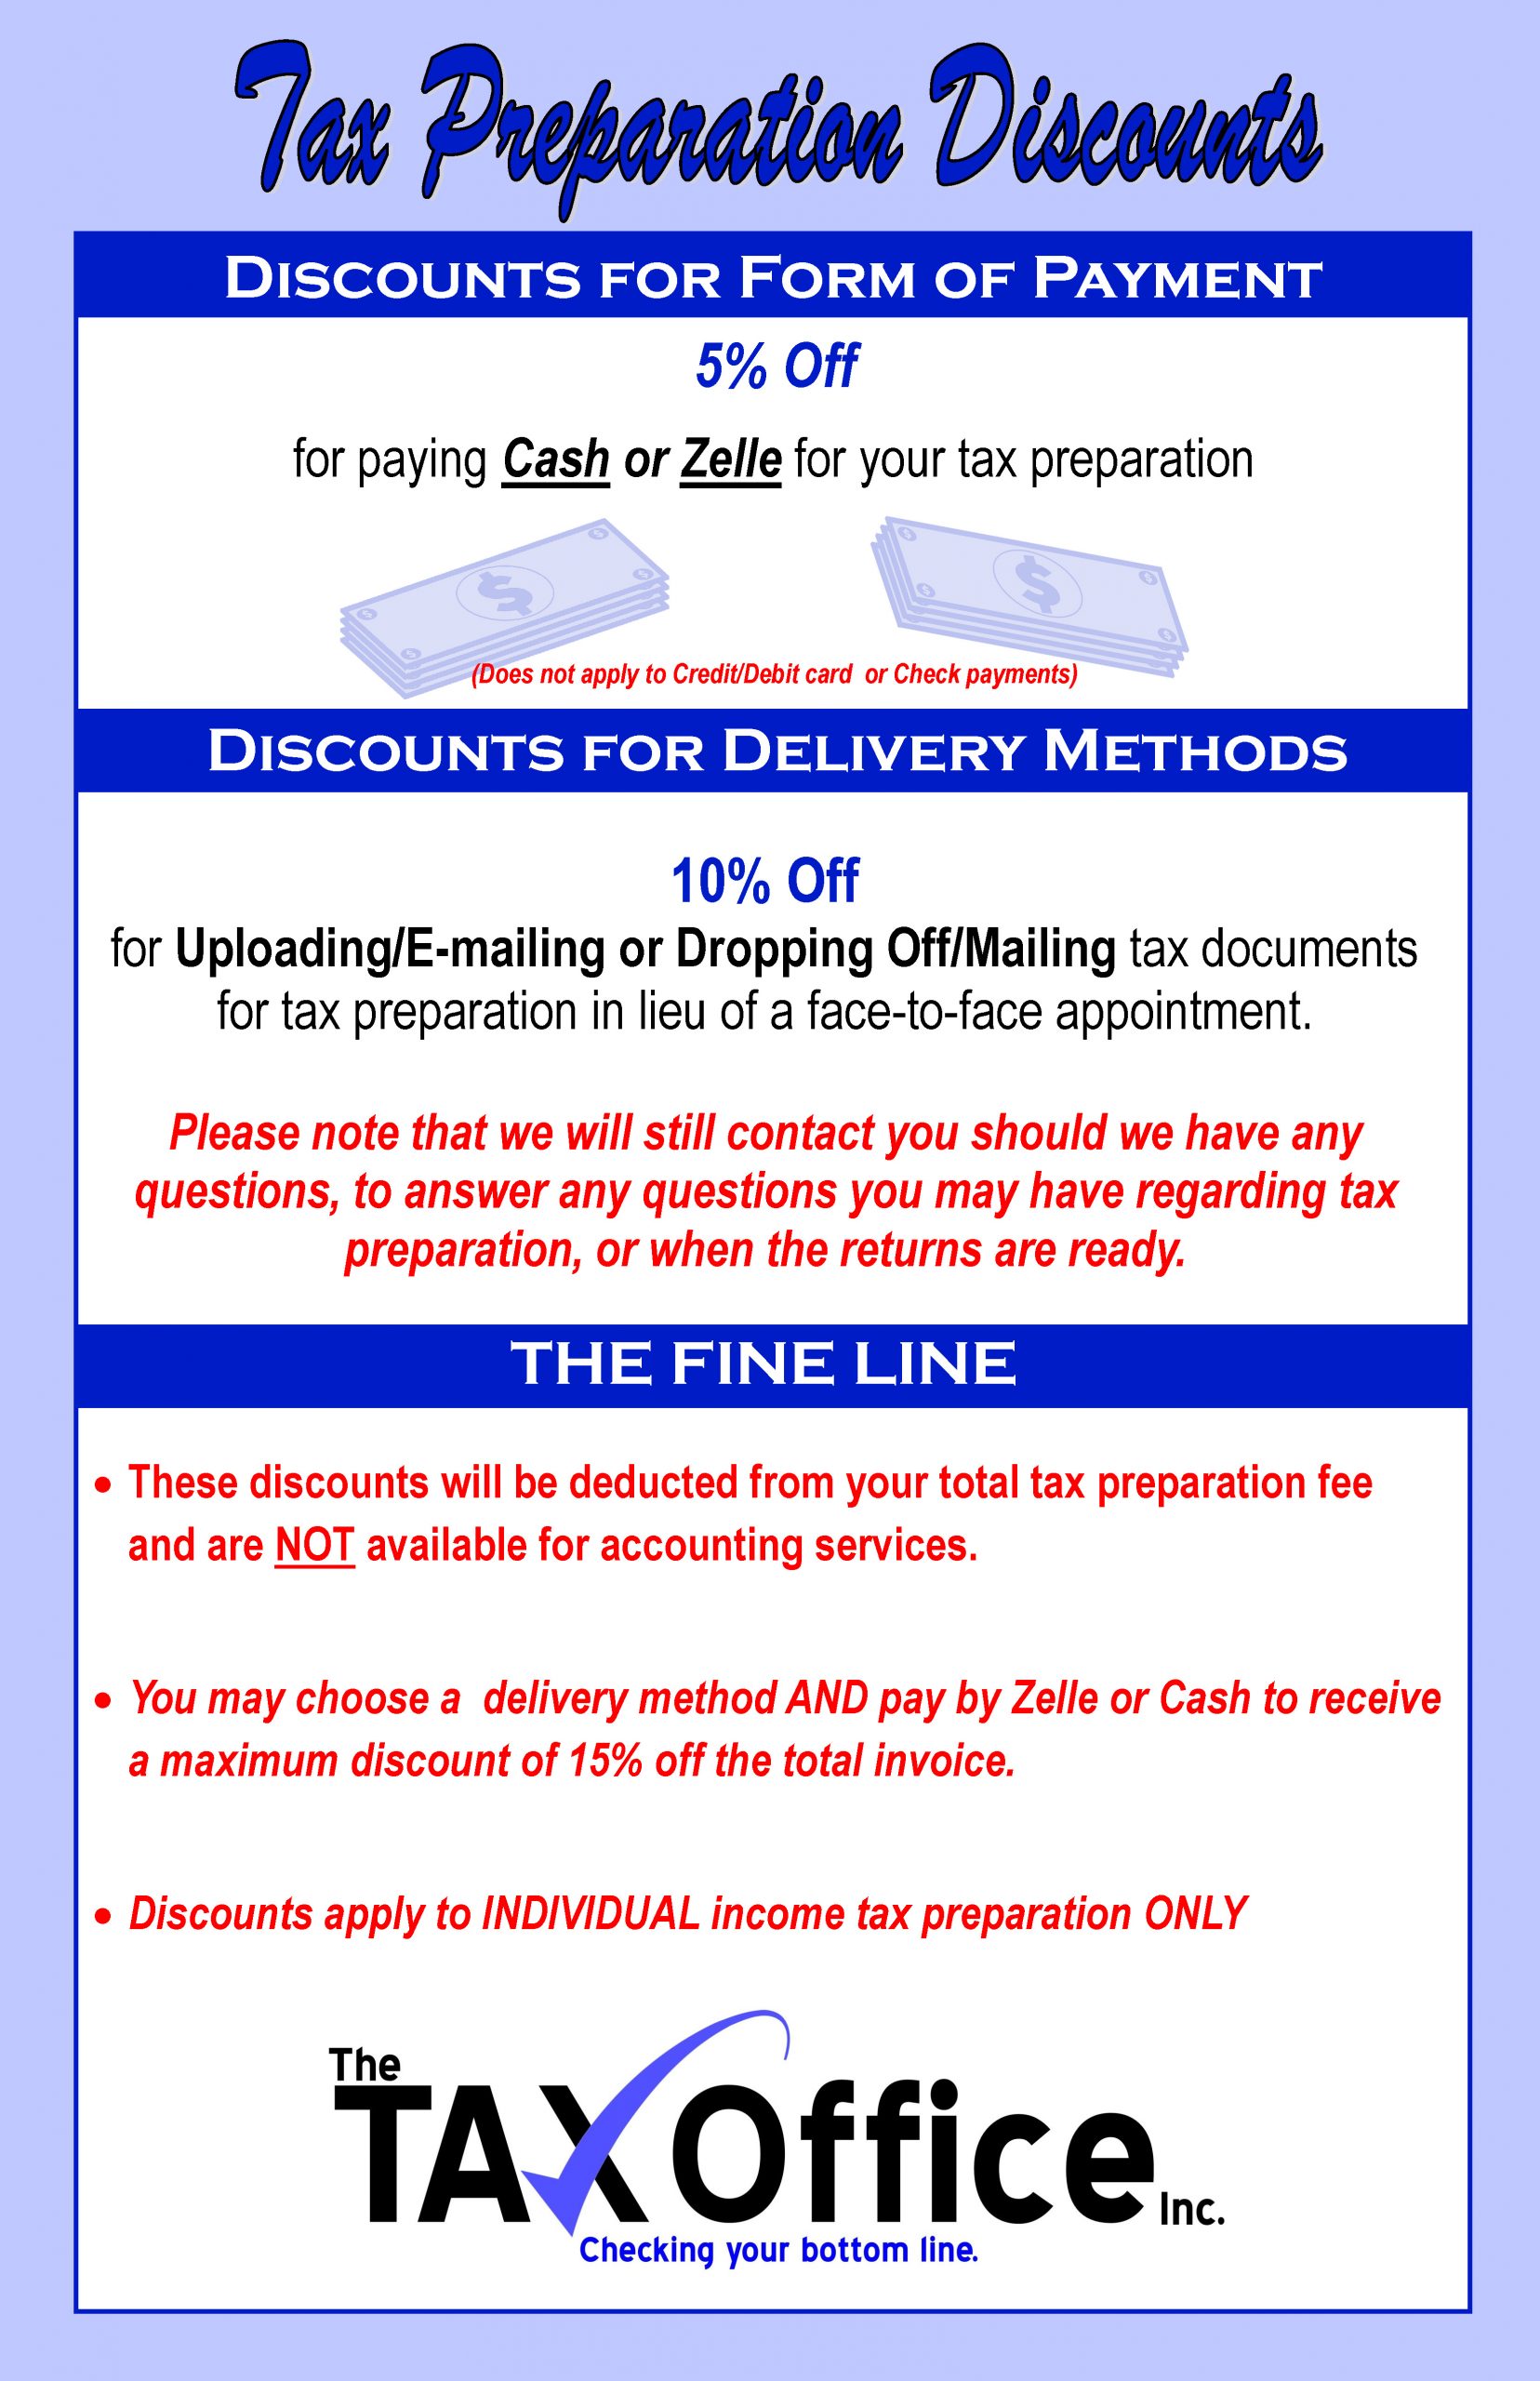 Our DISCOUNT Sheet_6.30.22